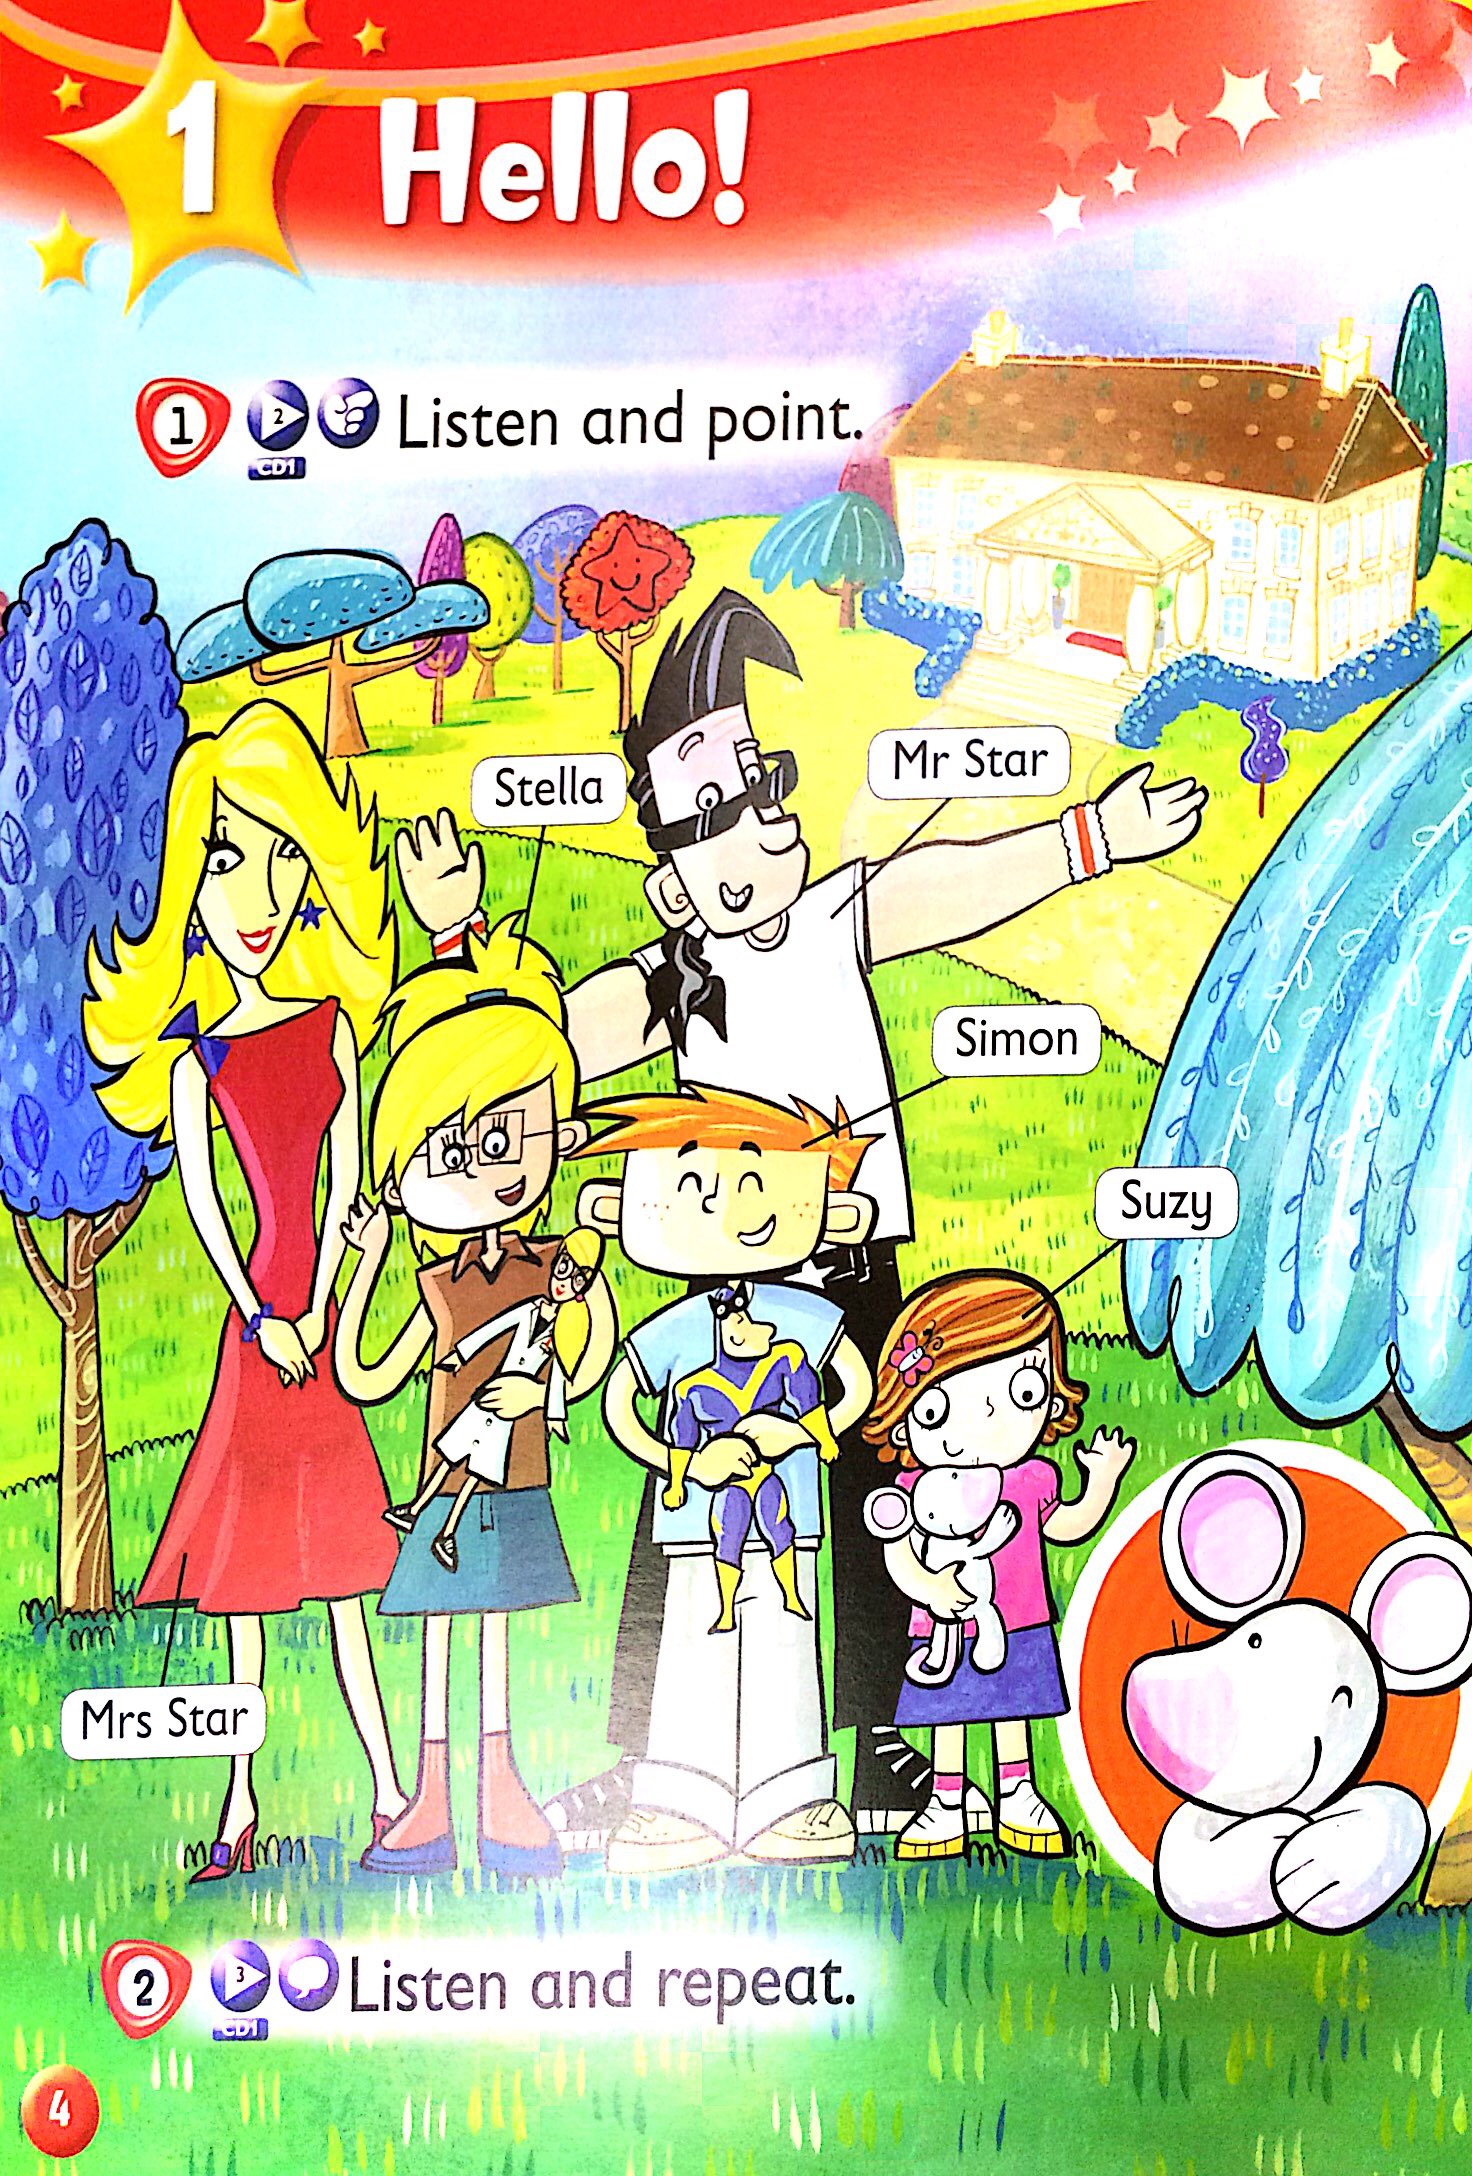 Kid's Box Second edition Pupil's Book Level 1